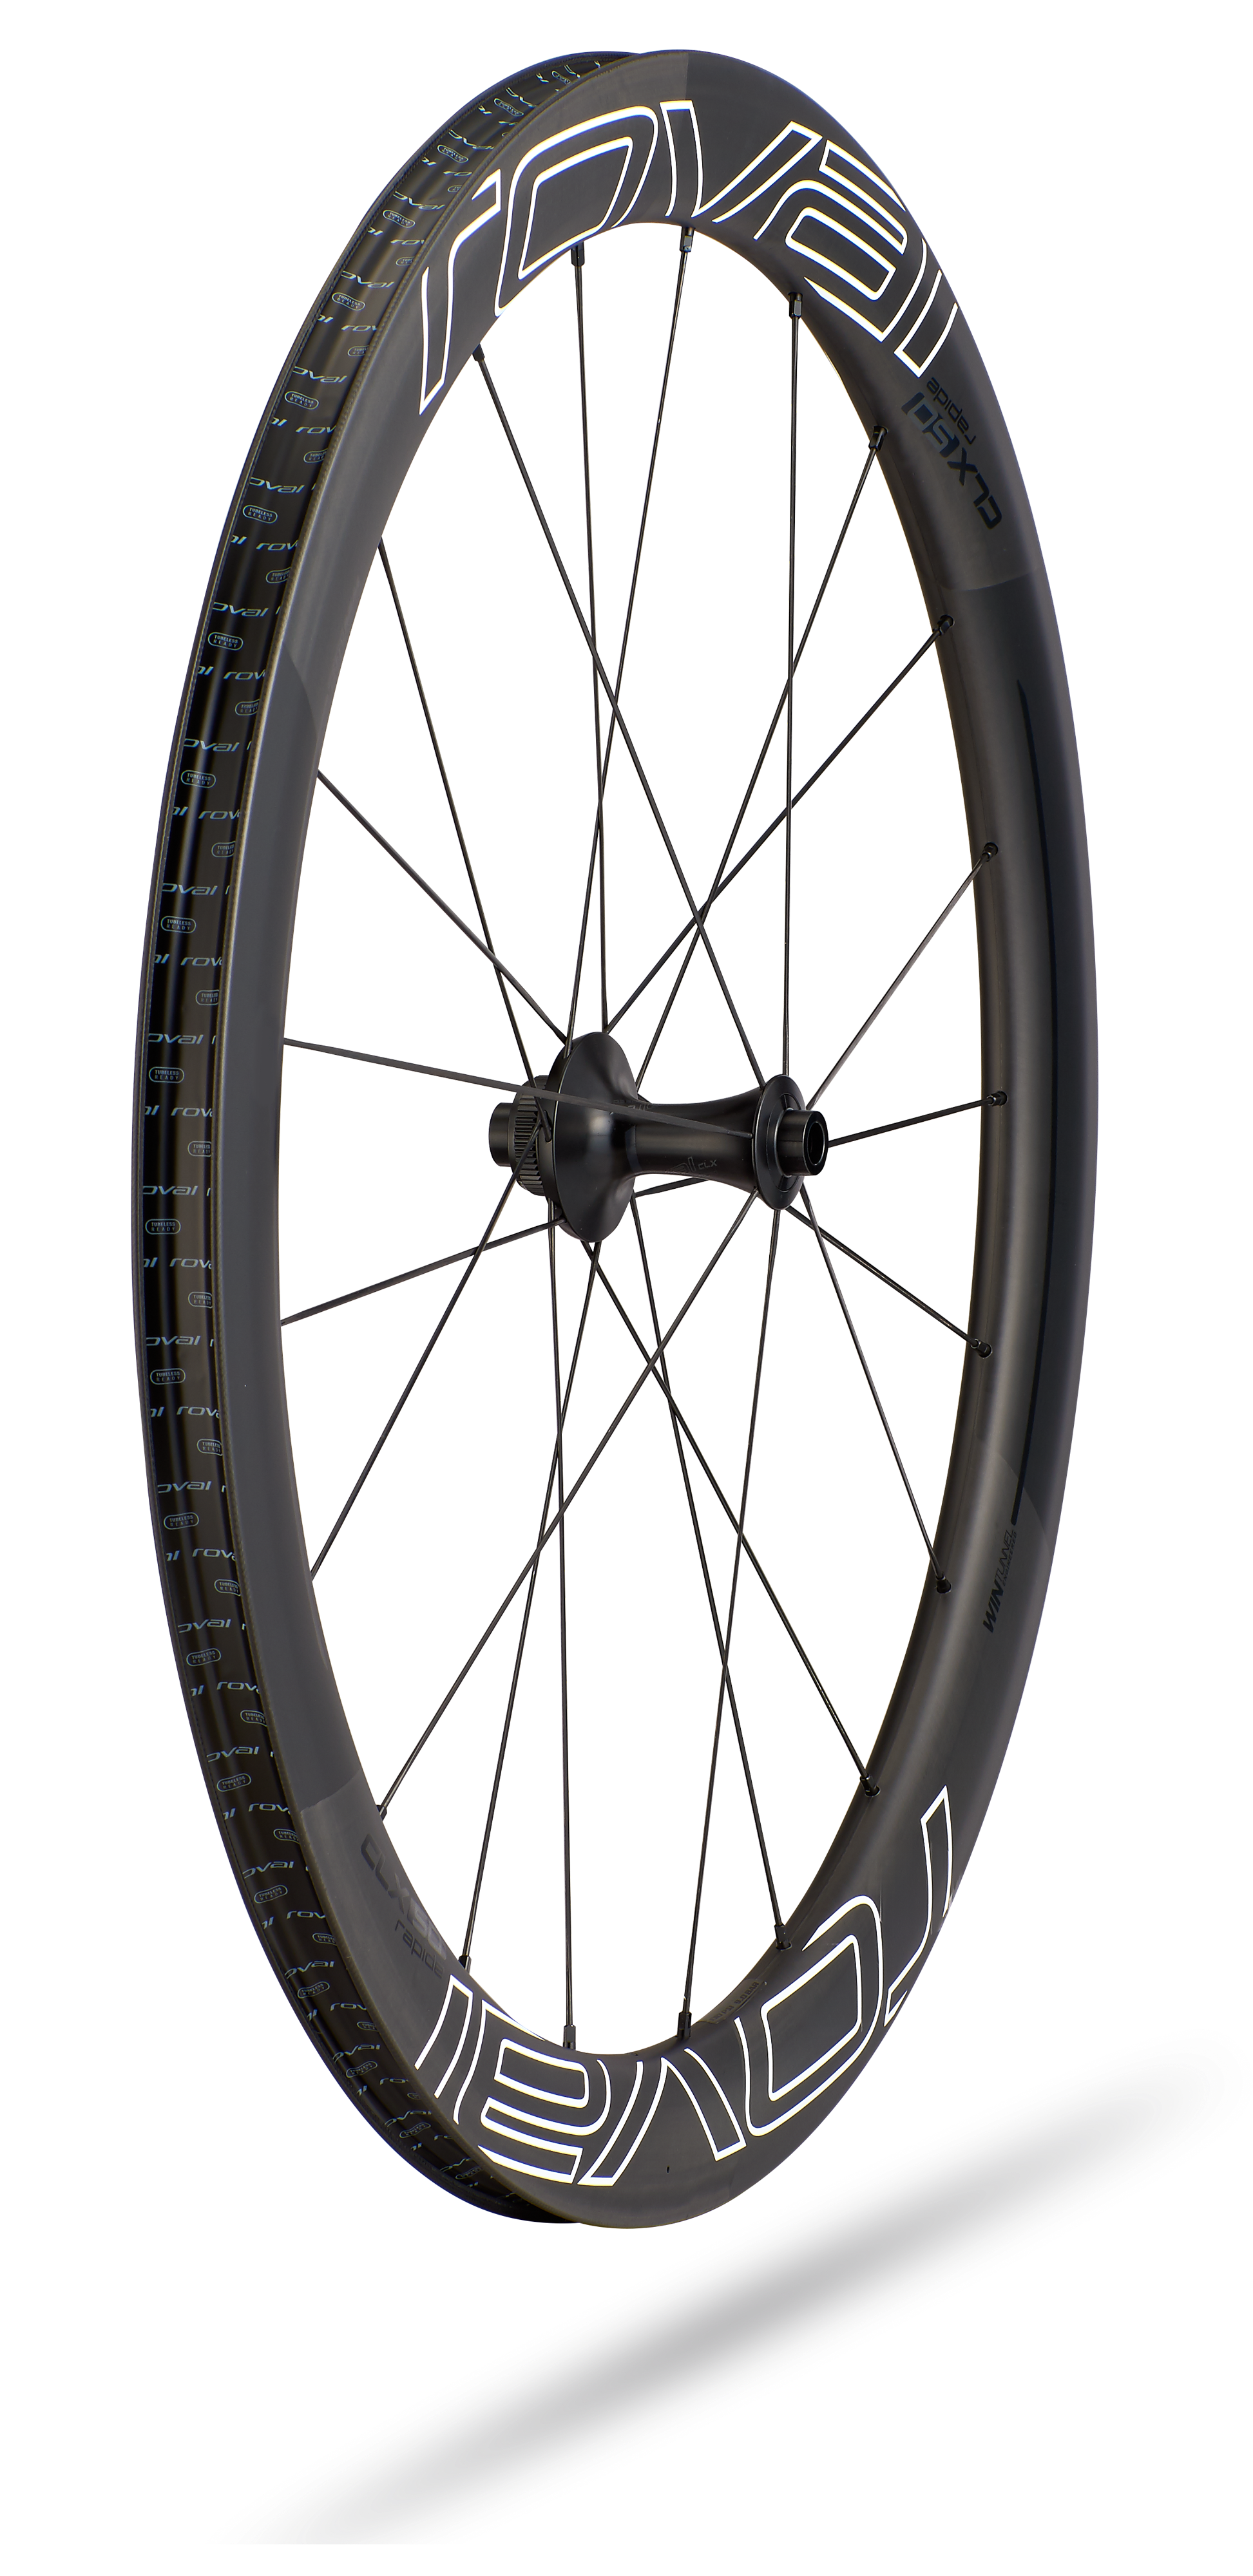 roval rapide clx 50 disc カーボンホイール